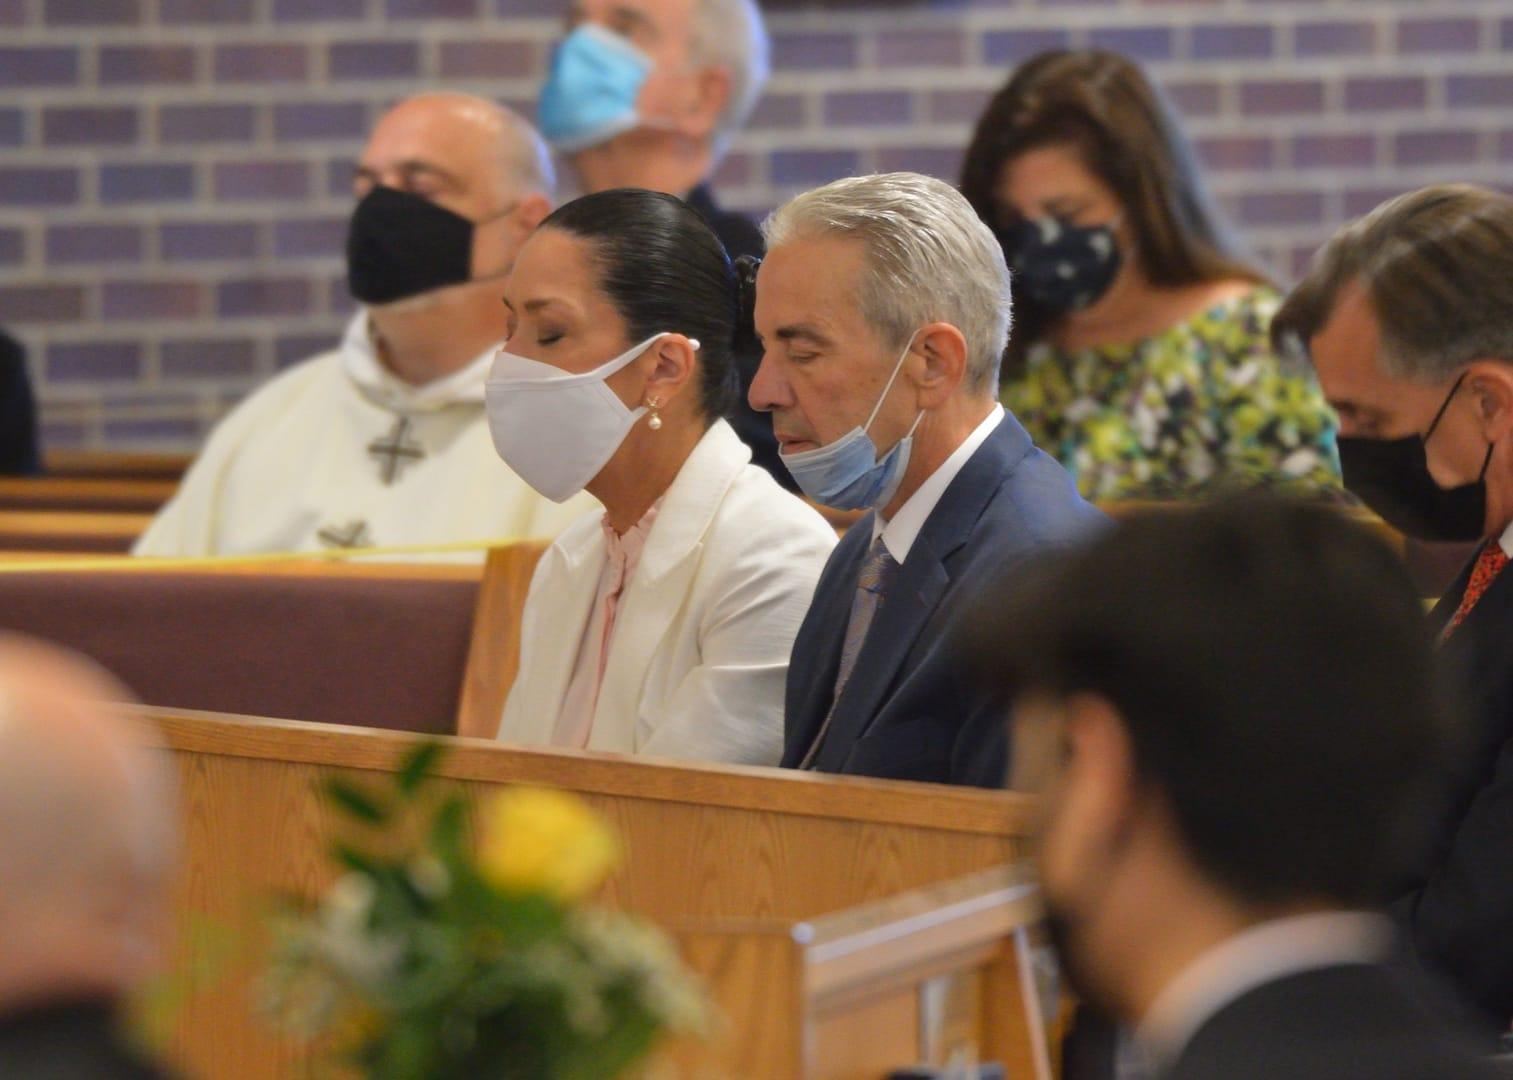 Mourners honor life of Daniel Anderl, celebrate his ‘gift of faith’